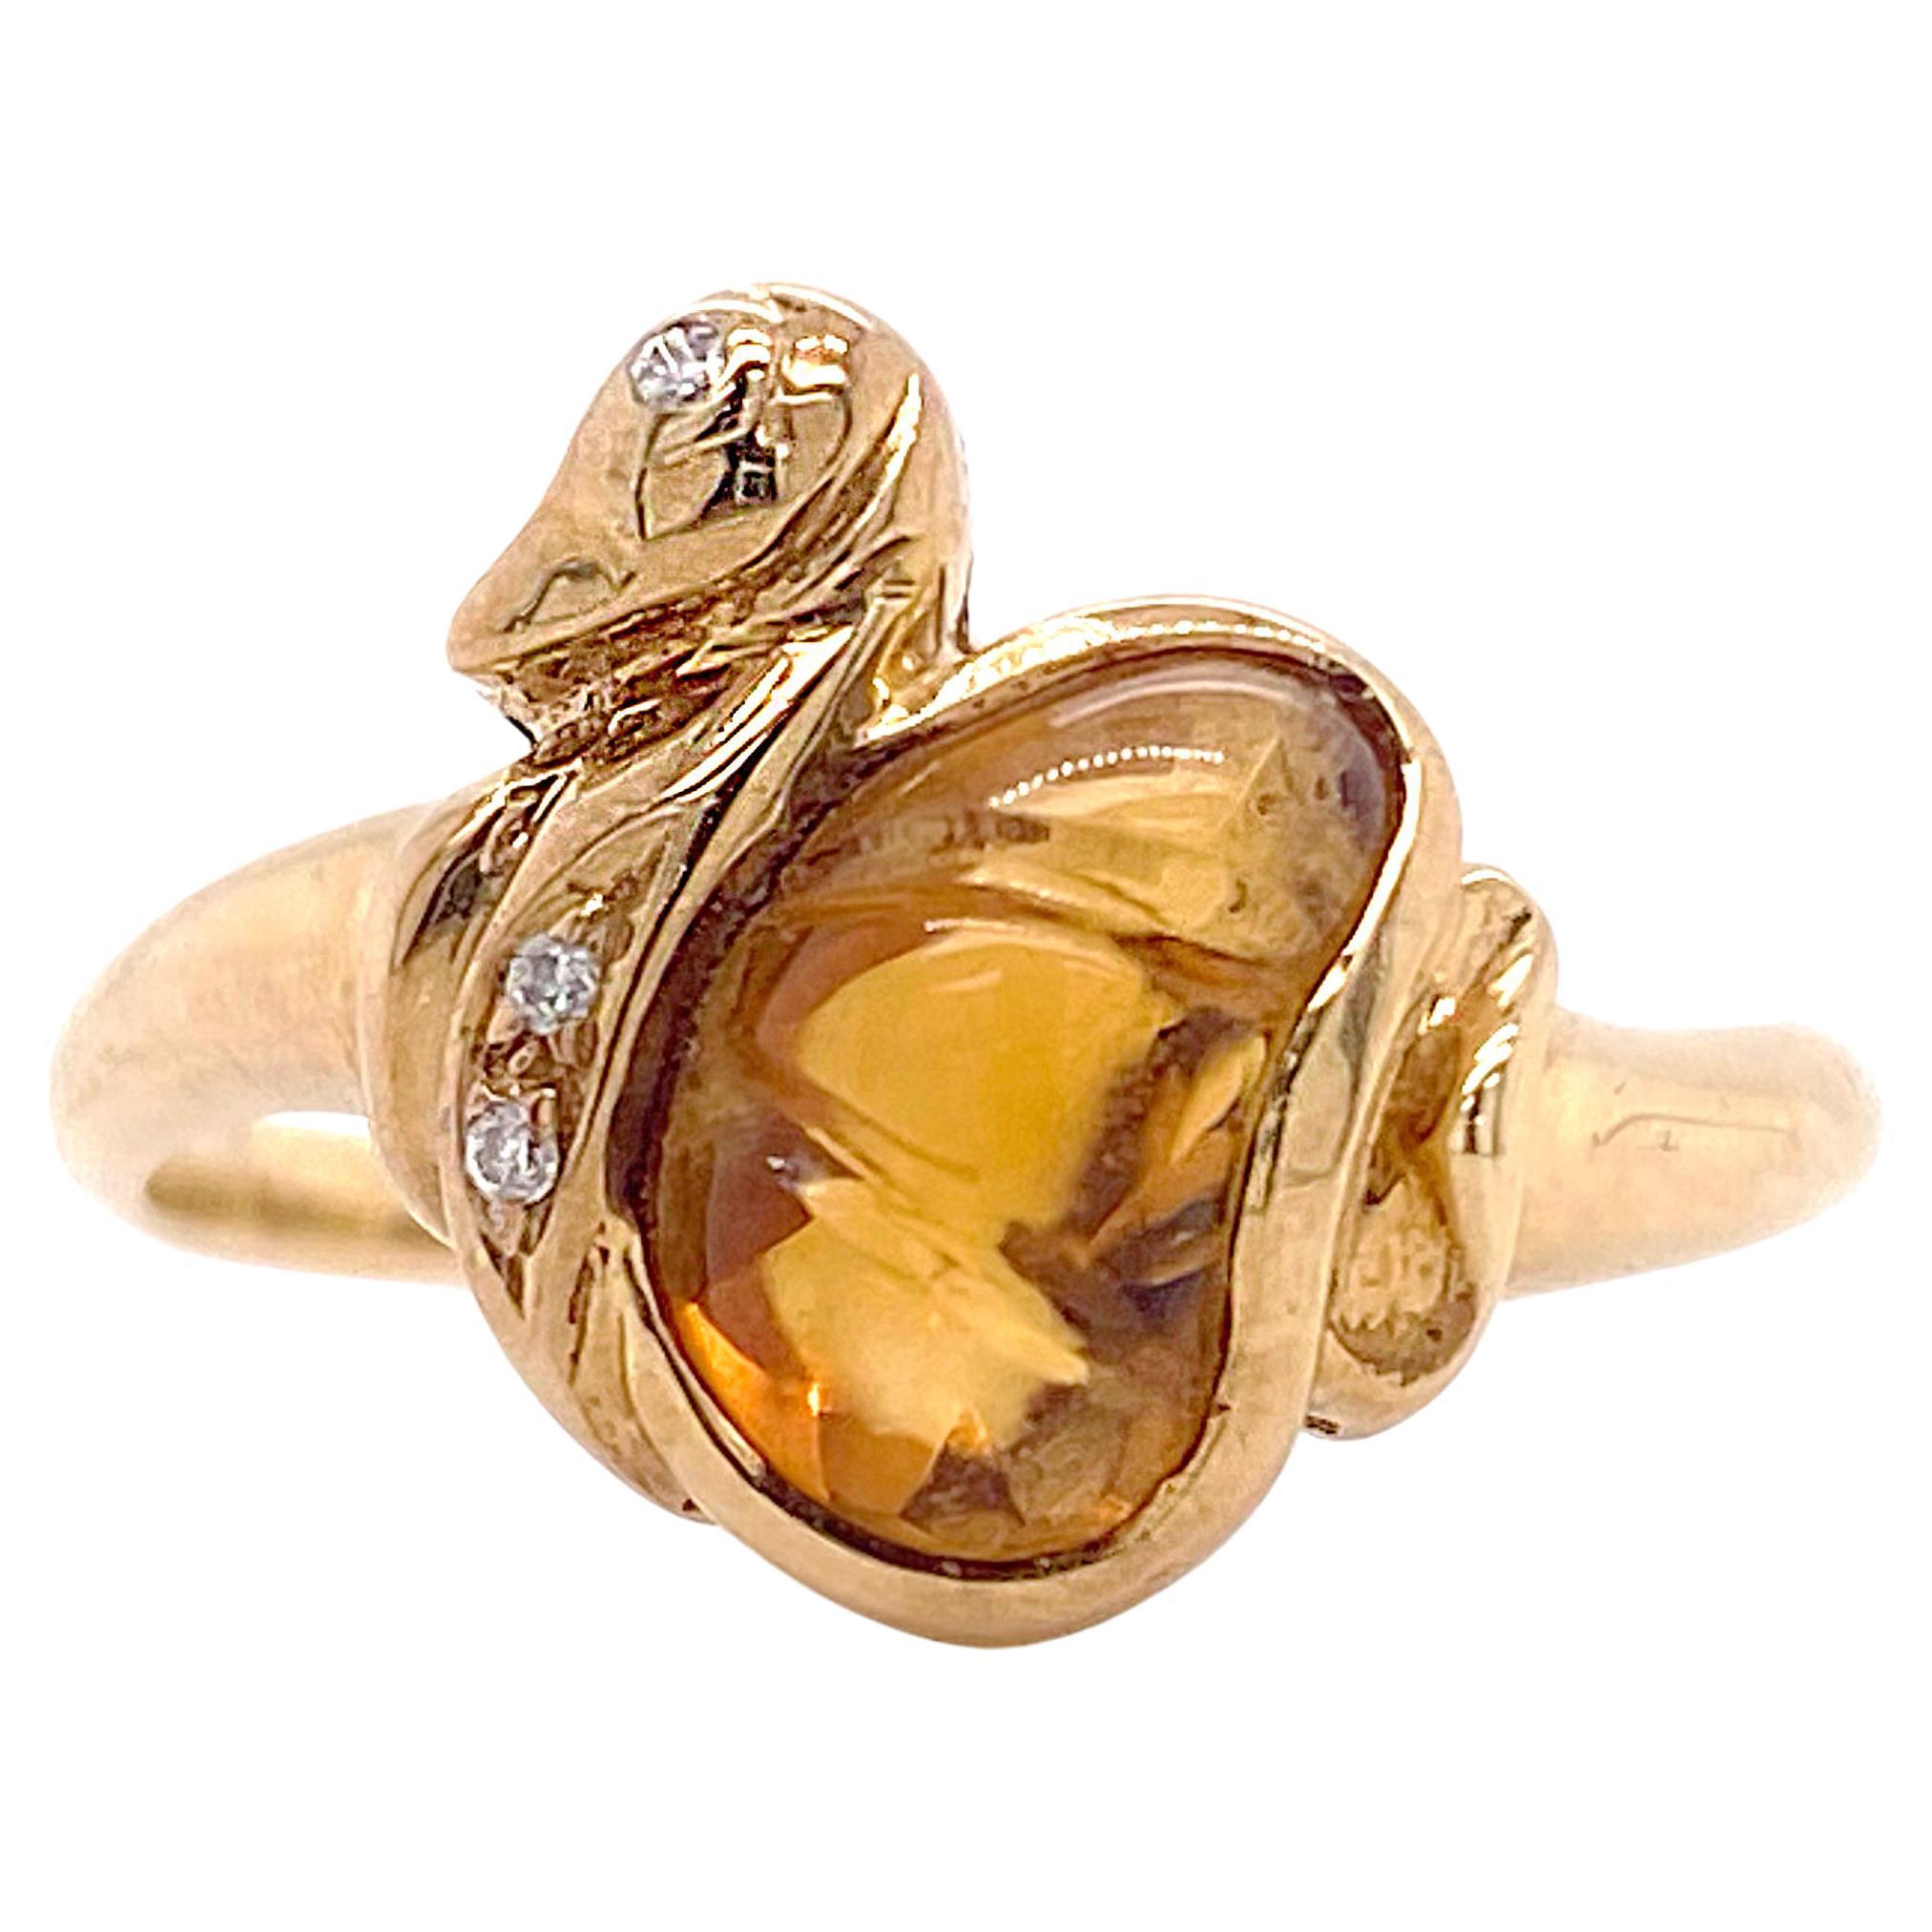 Citrine Swan Ring w Diamonds Yellow Gold, Estate Ring with a Unique Swan Shape